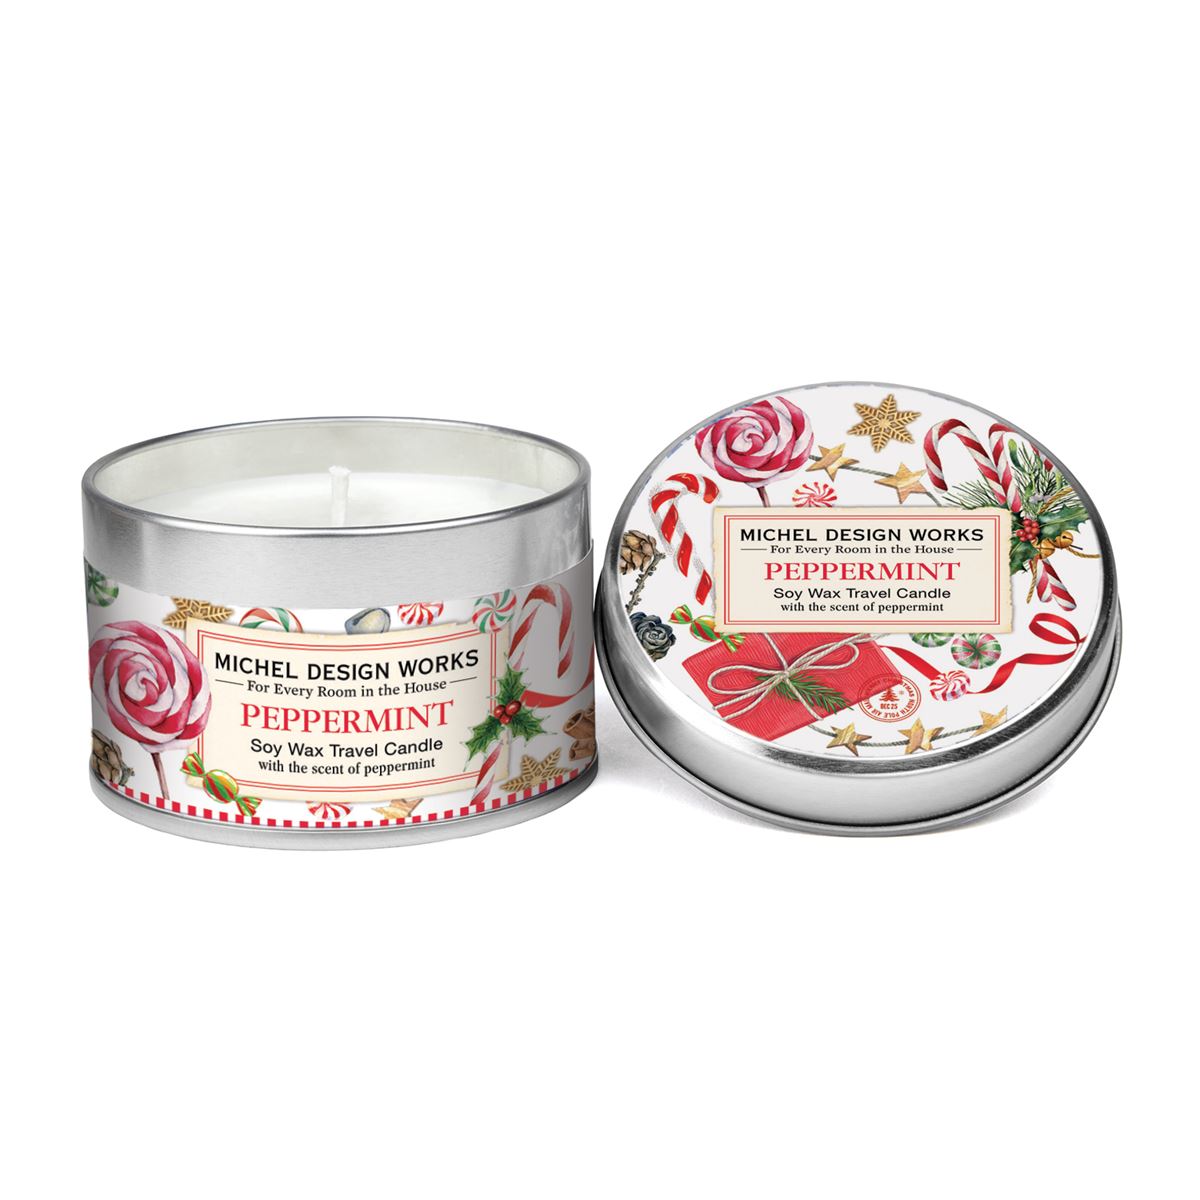 Peppermint Soy Wax Travel Candle    